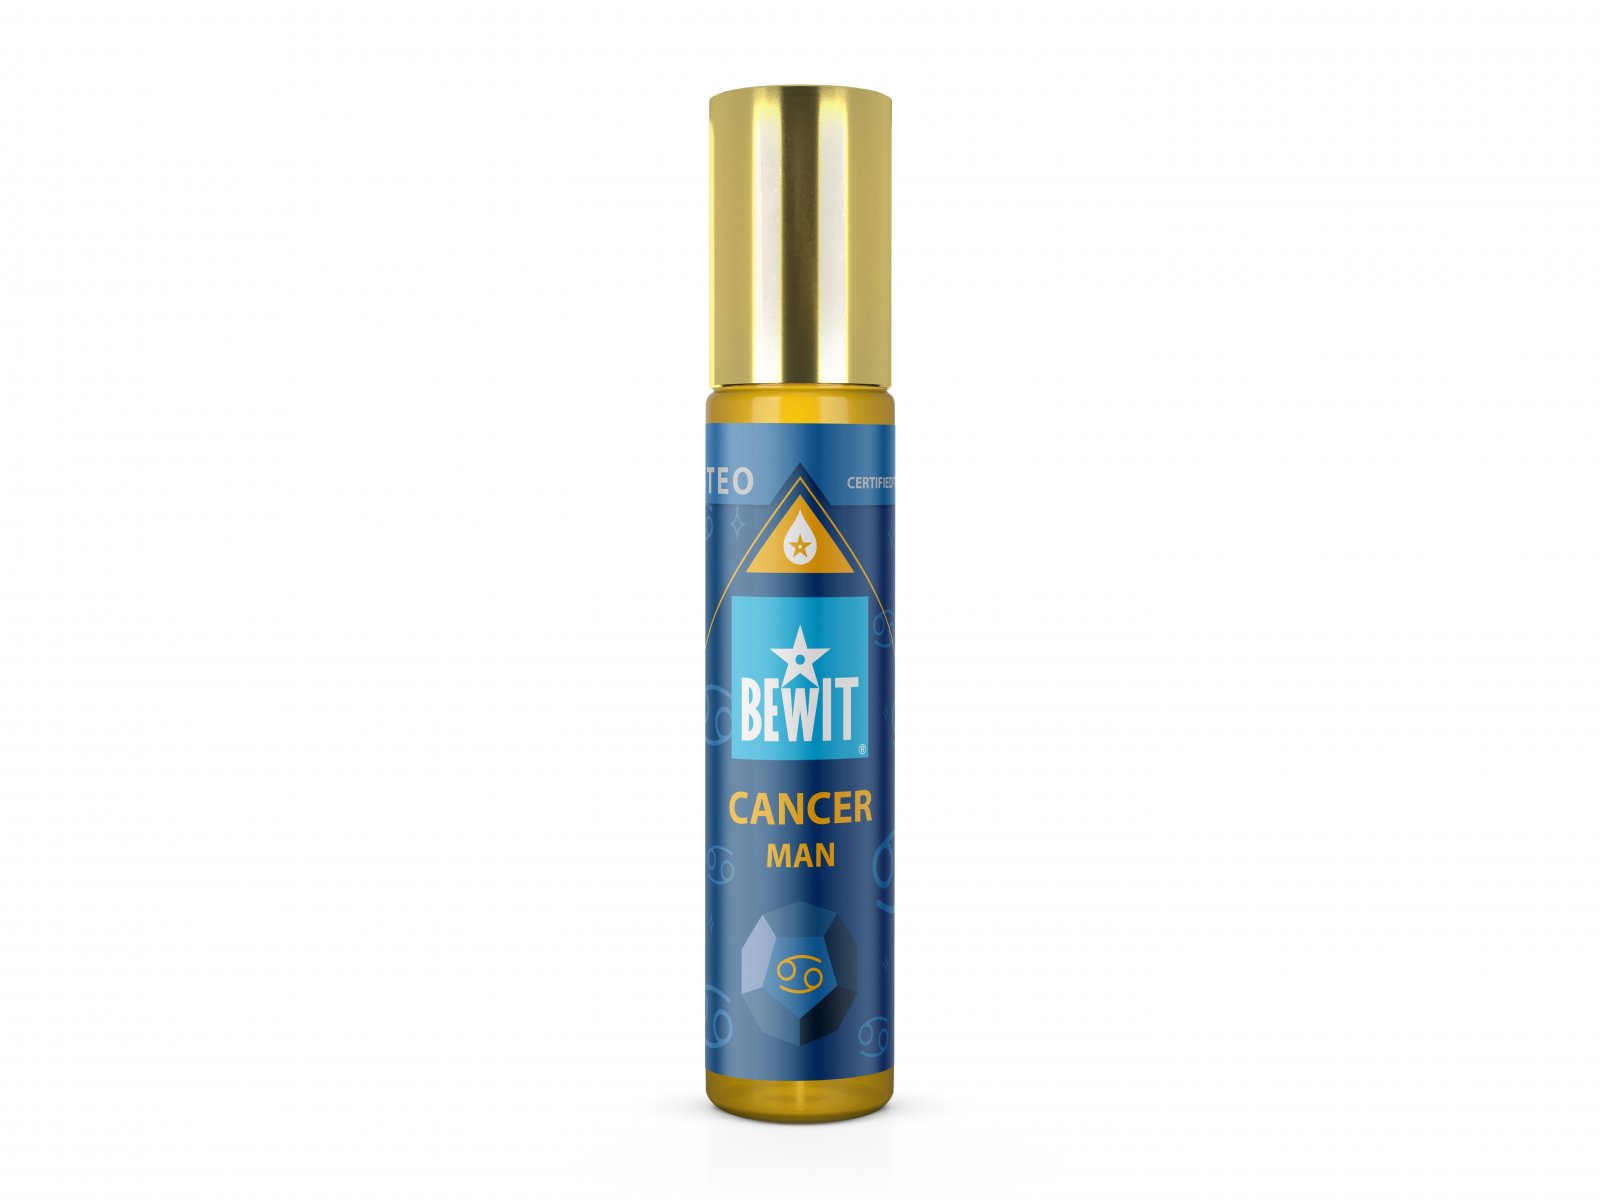 BEWIT MAN CANCER (CRAB) - Men's roll-on oil perfume